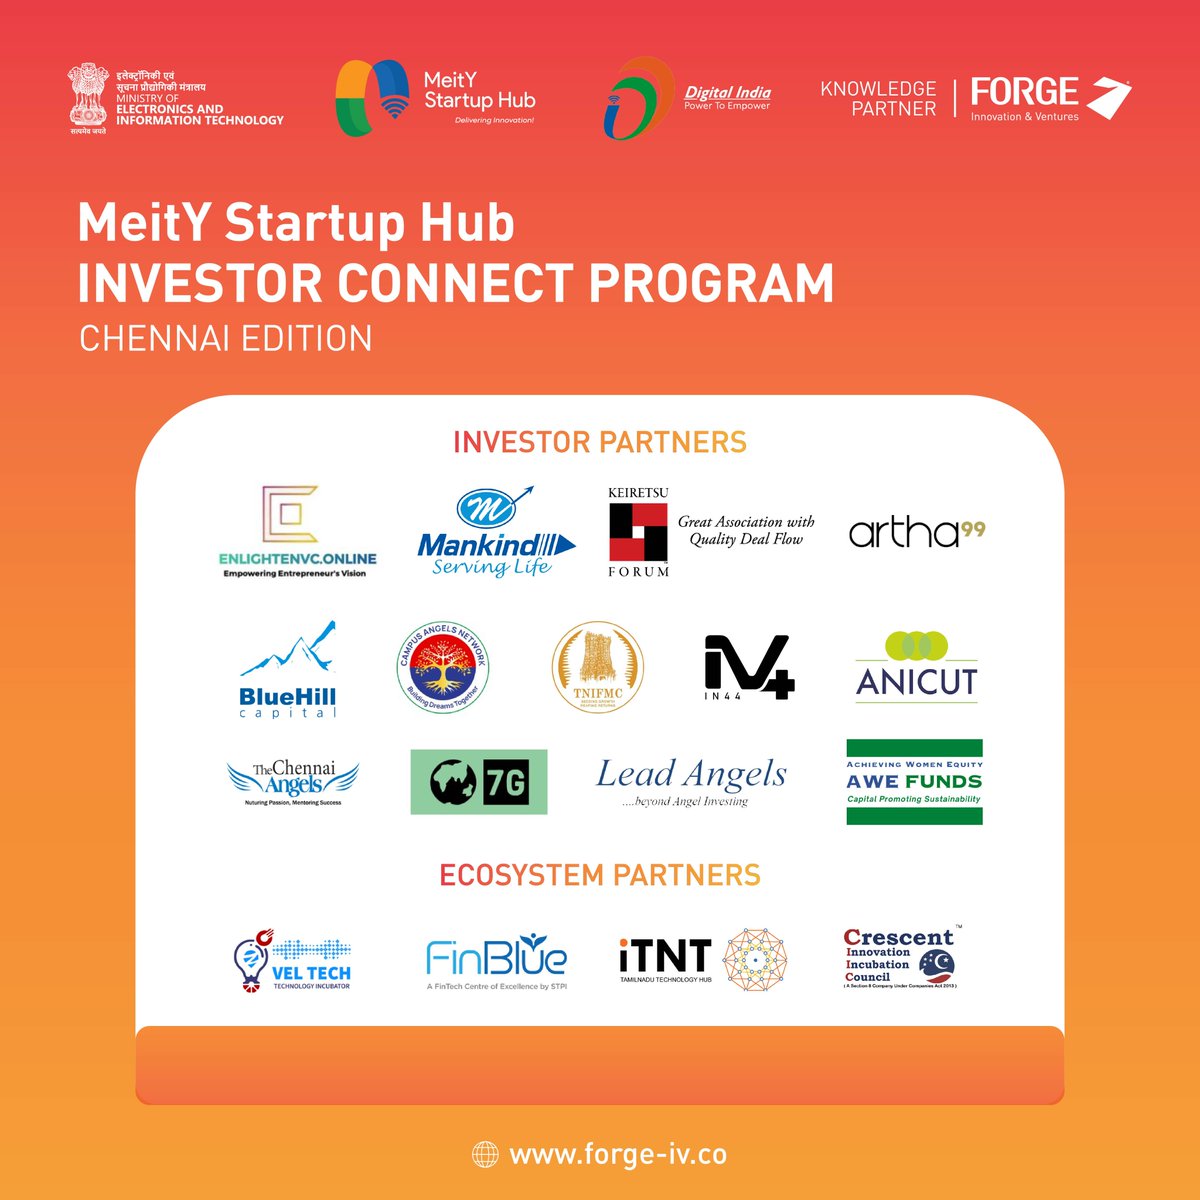 With our ongoing series of Investor Connect, our next chapter is Chennai, Tamil Nadu. To empower emerging startups in Chennai with essential guidance and mentorship, MeitY Startup Hub is organizing its 6th ‘Investor Connect Program’ supported by Forge Innovation & Ventures.